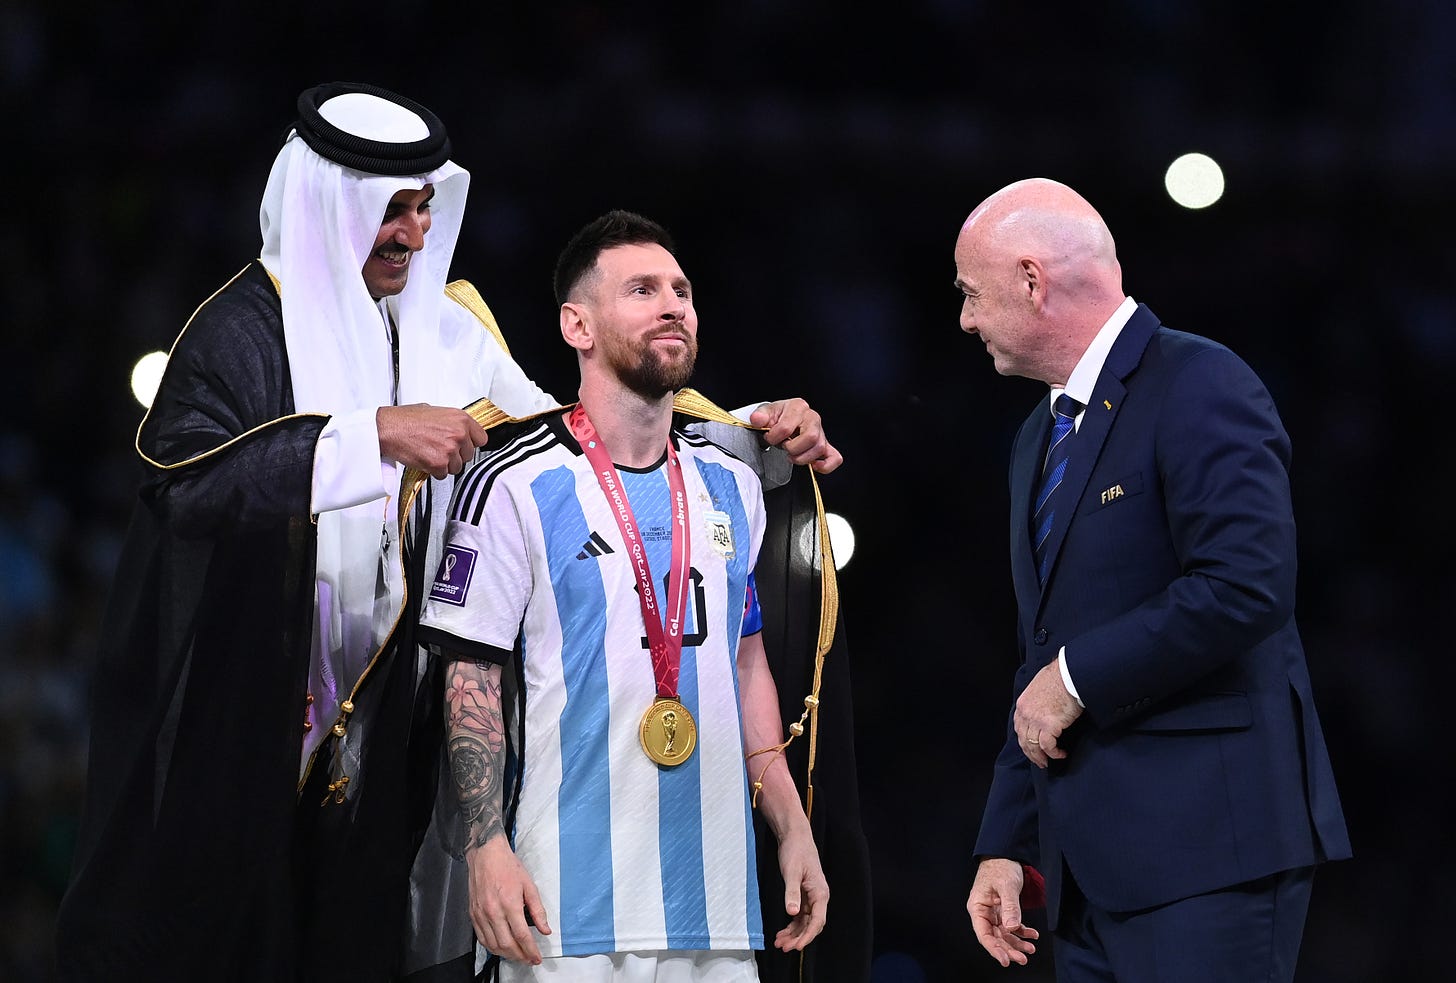 Before joining his teammates the Emir of Qatar put the cloak on Messi